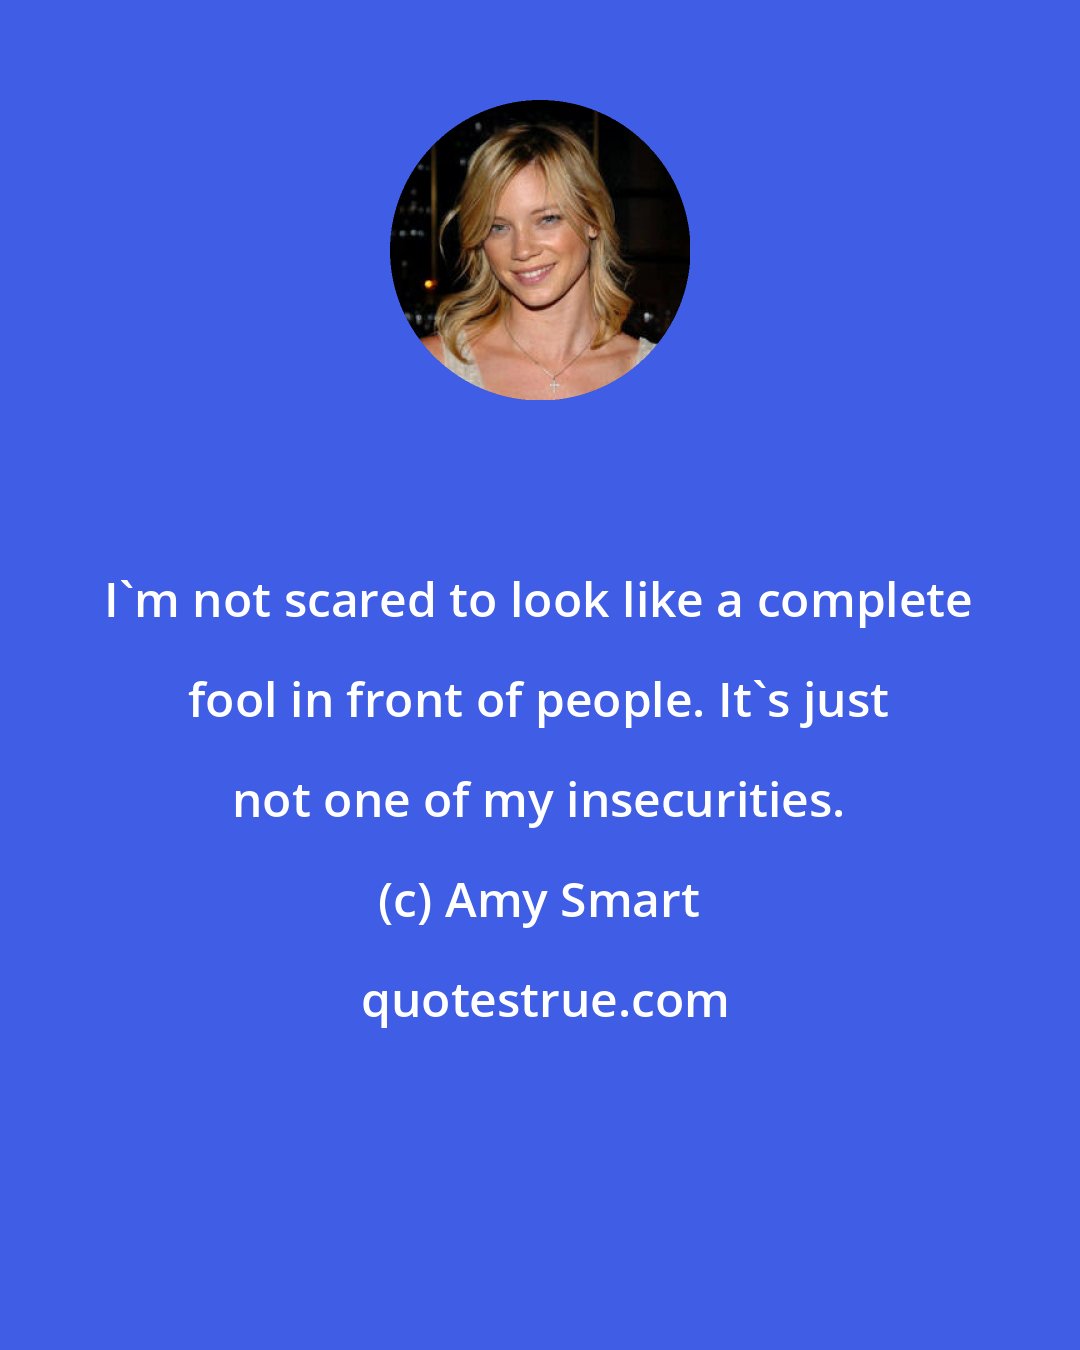 Amy Smart: I'm not scared to look like a complete fool in front of people. It's just not one of my insecurities.